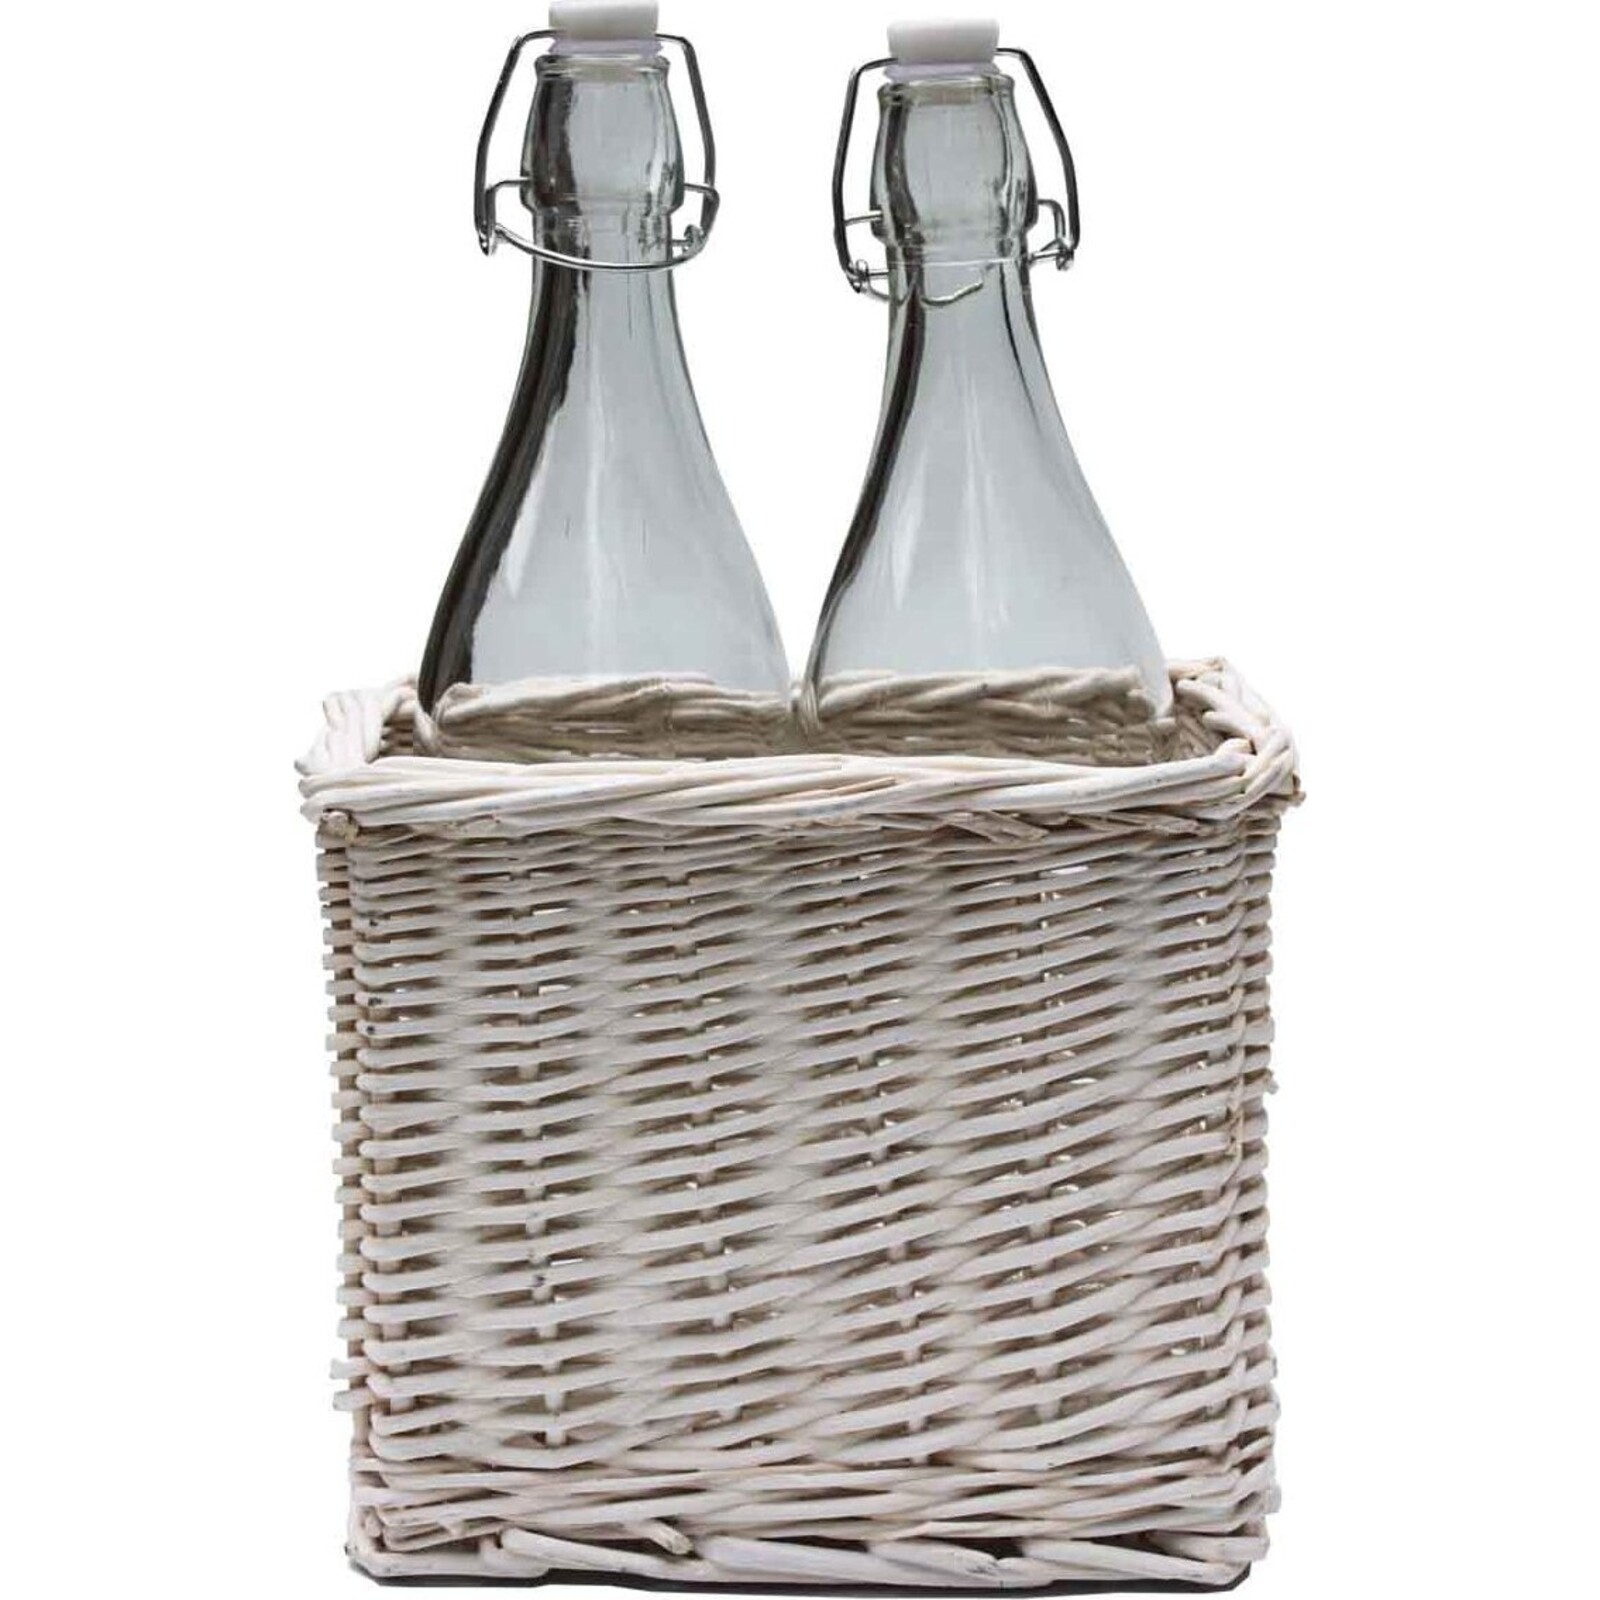 Baskets with 2 bottles